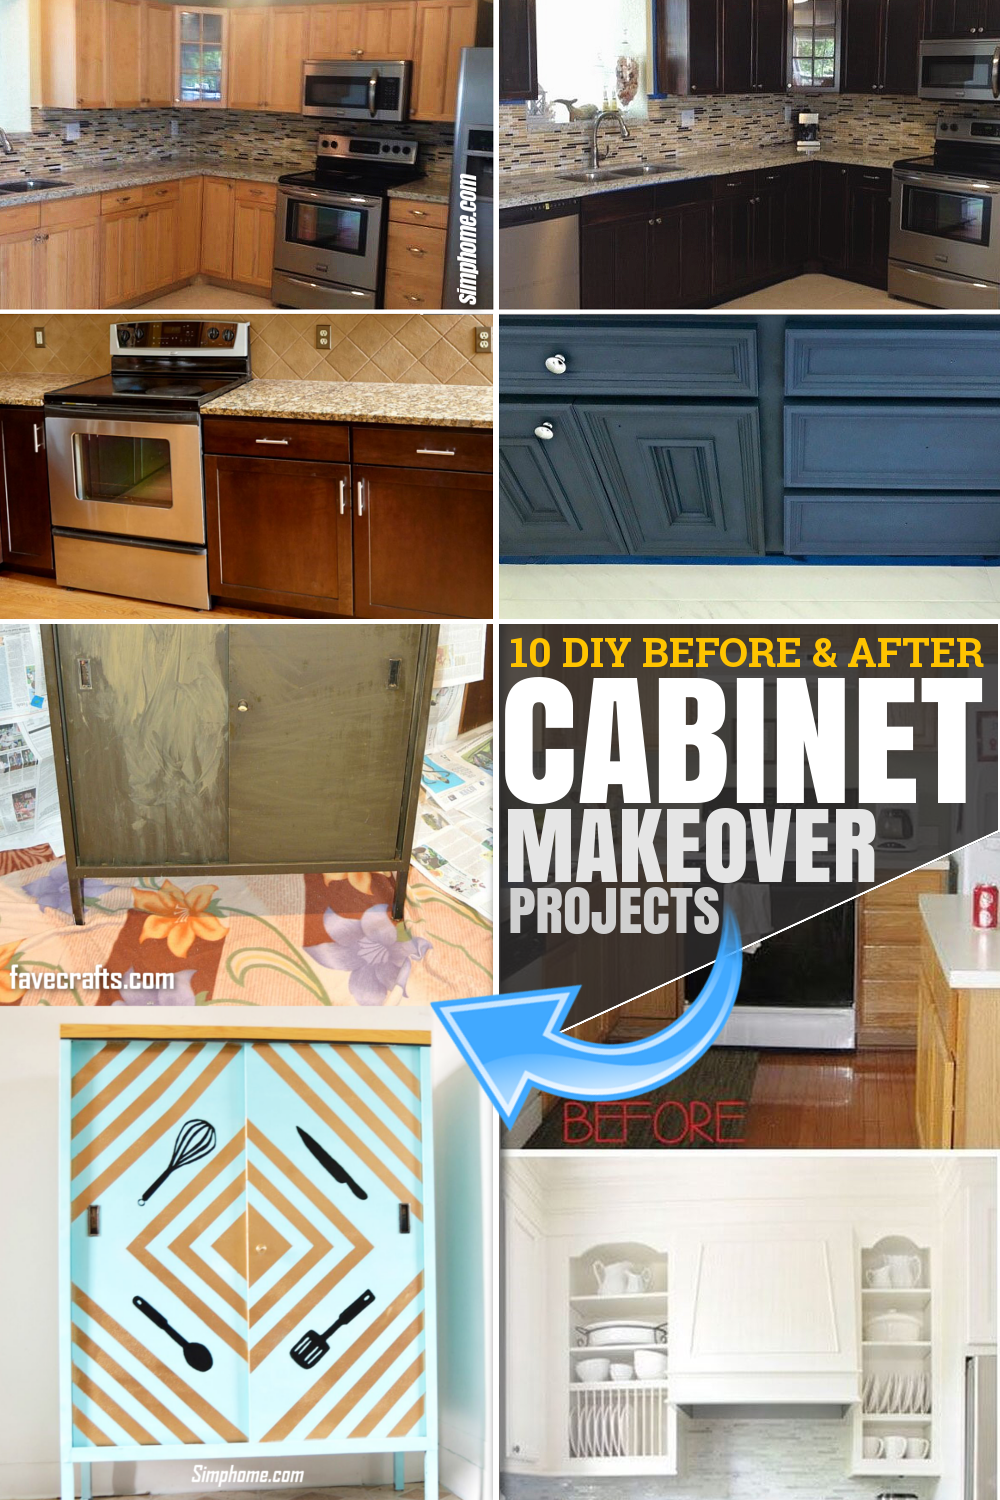 10 DIY before and after cabinet makeover projects via SIMPHOME.COM Featured Pinterest Image